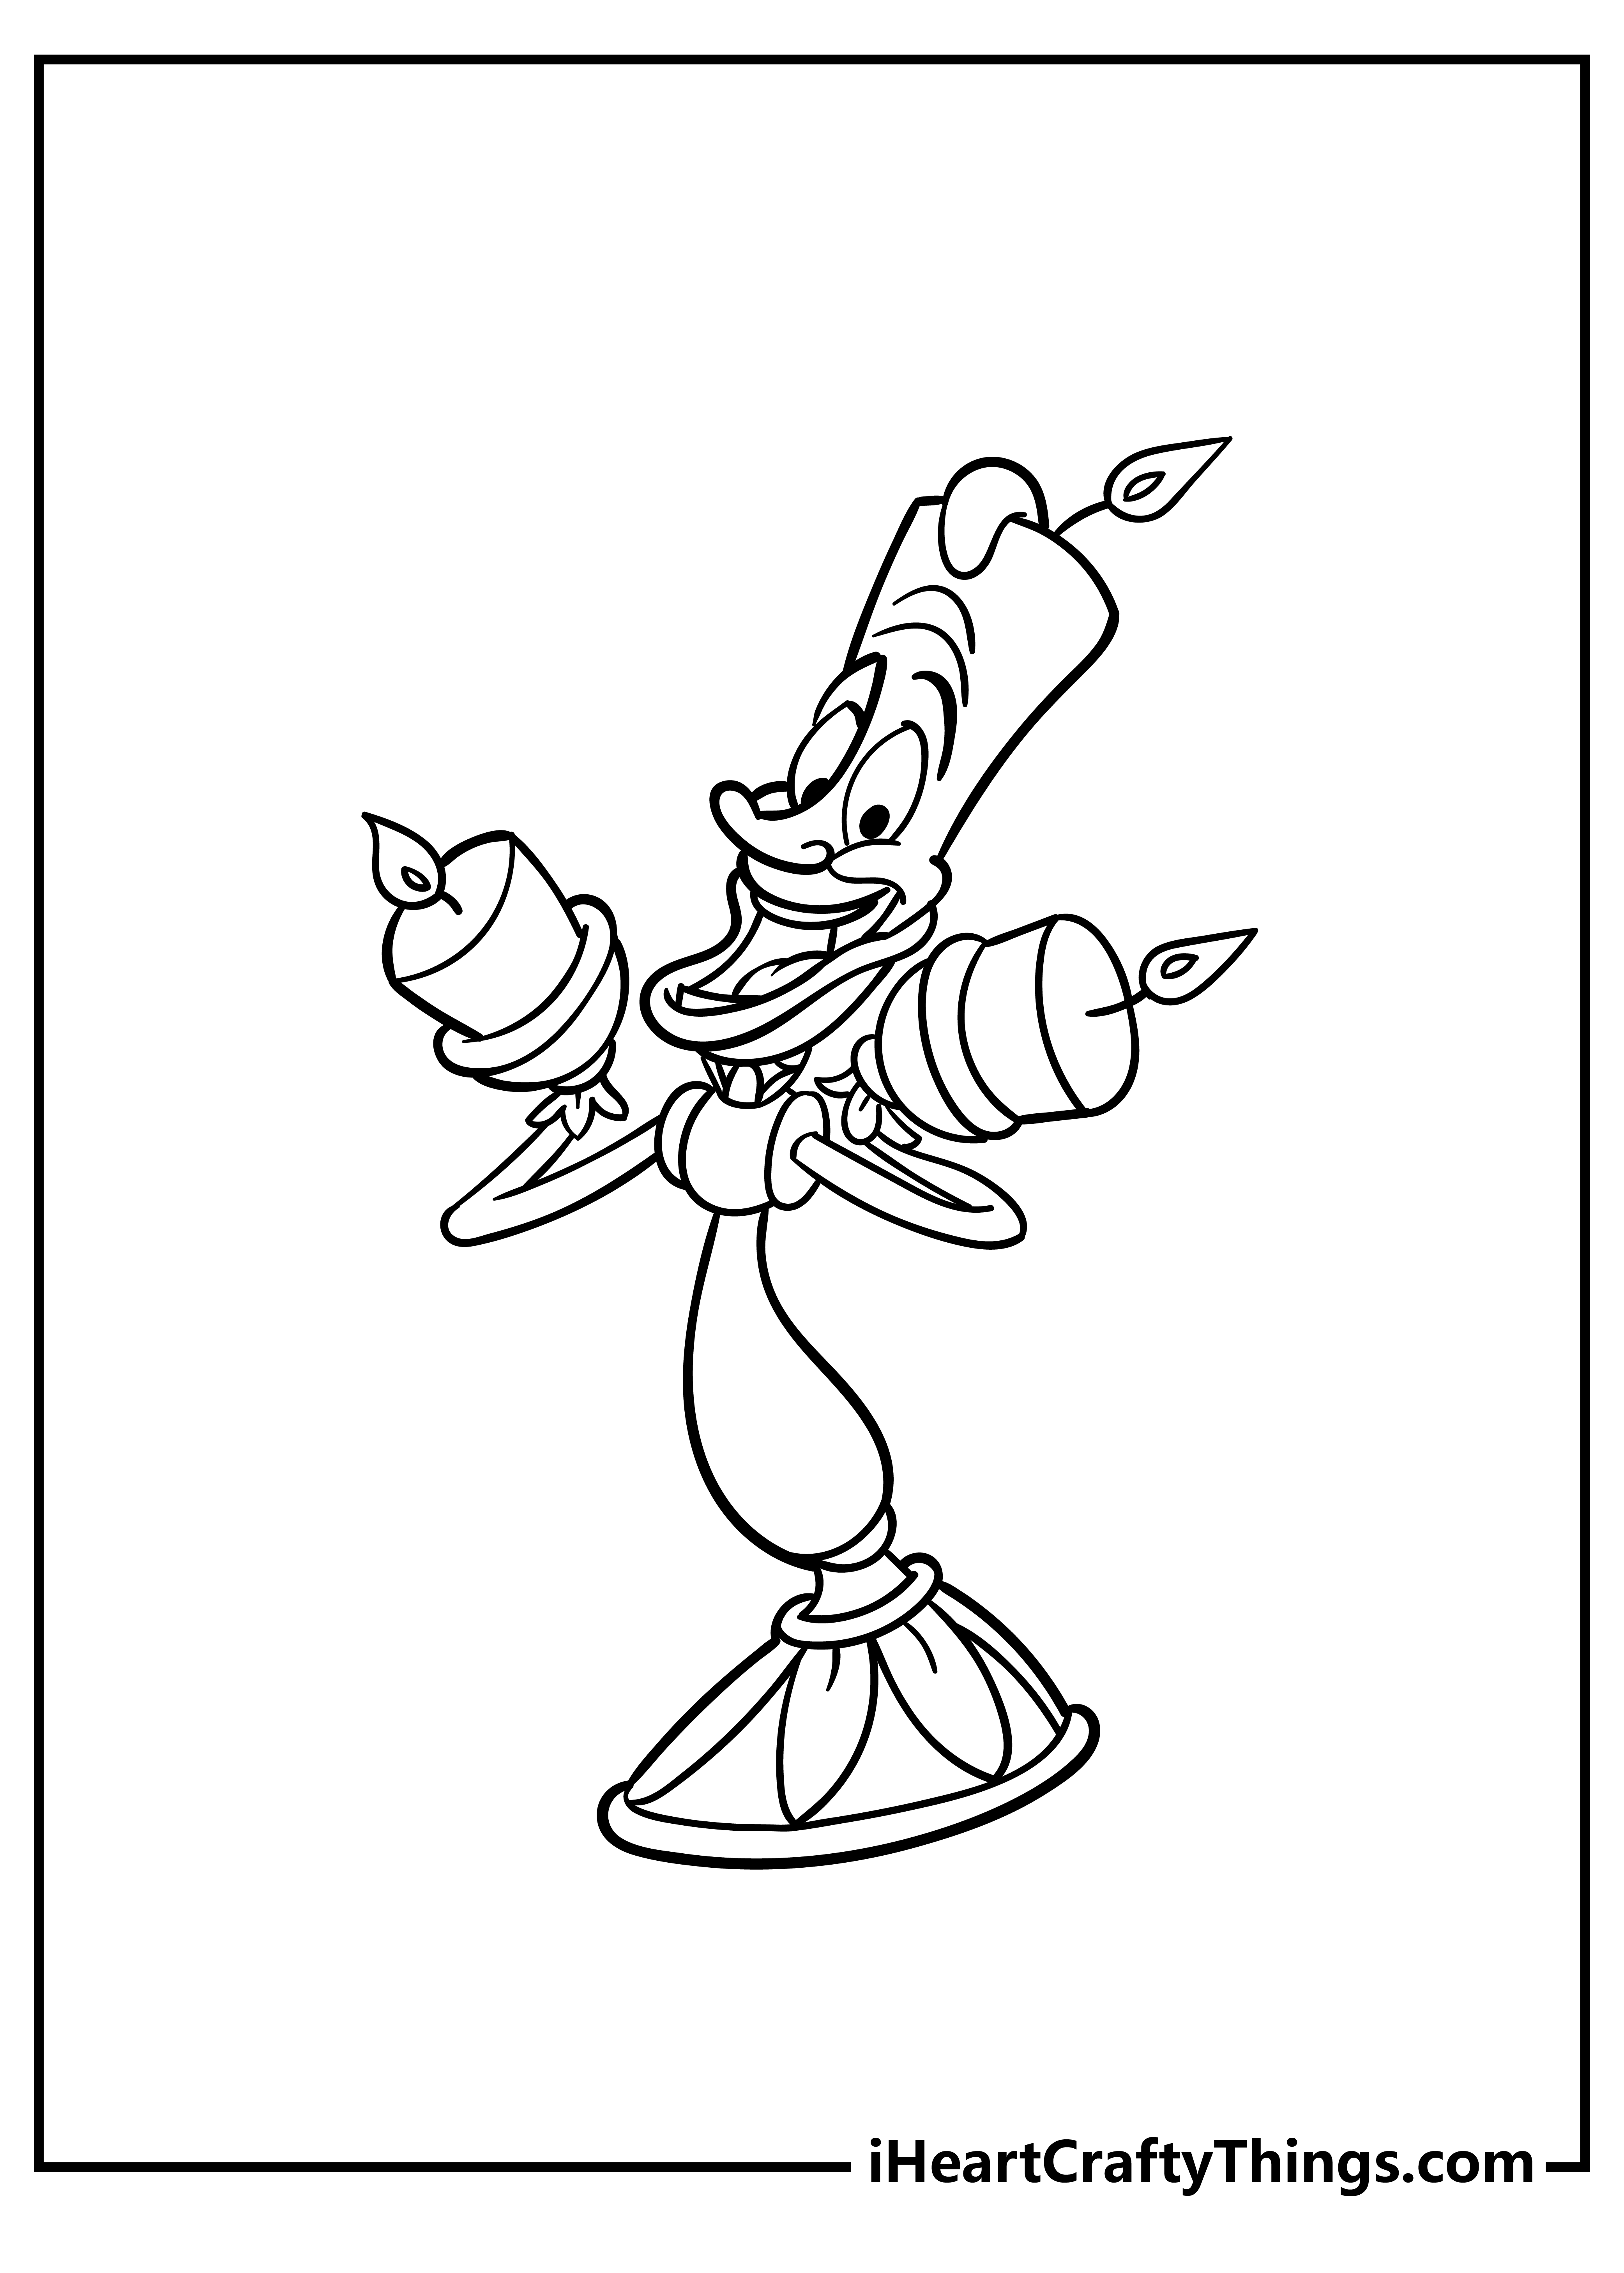 Beauty and the Beast Coloring Book for kids free printable